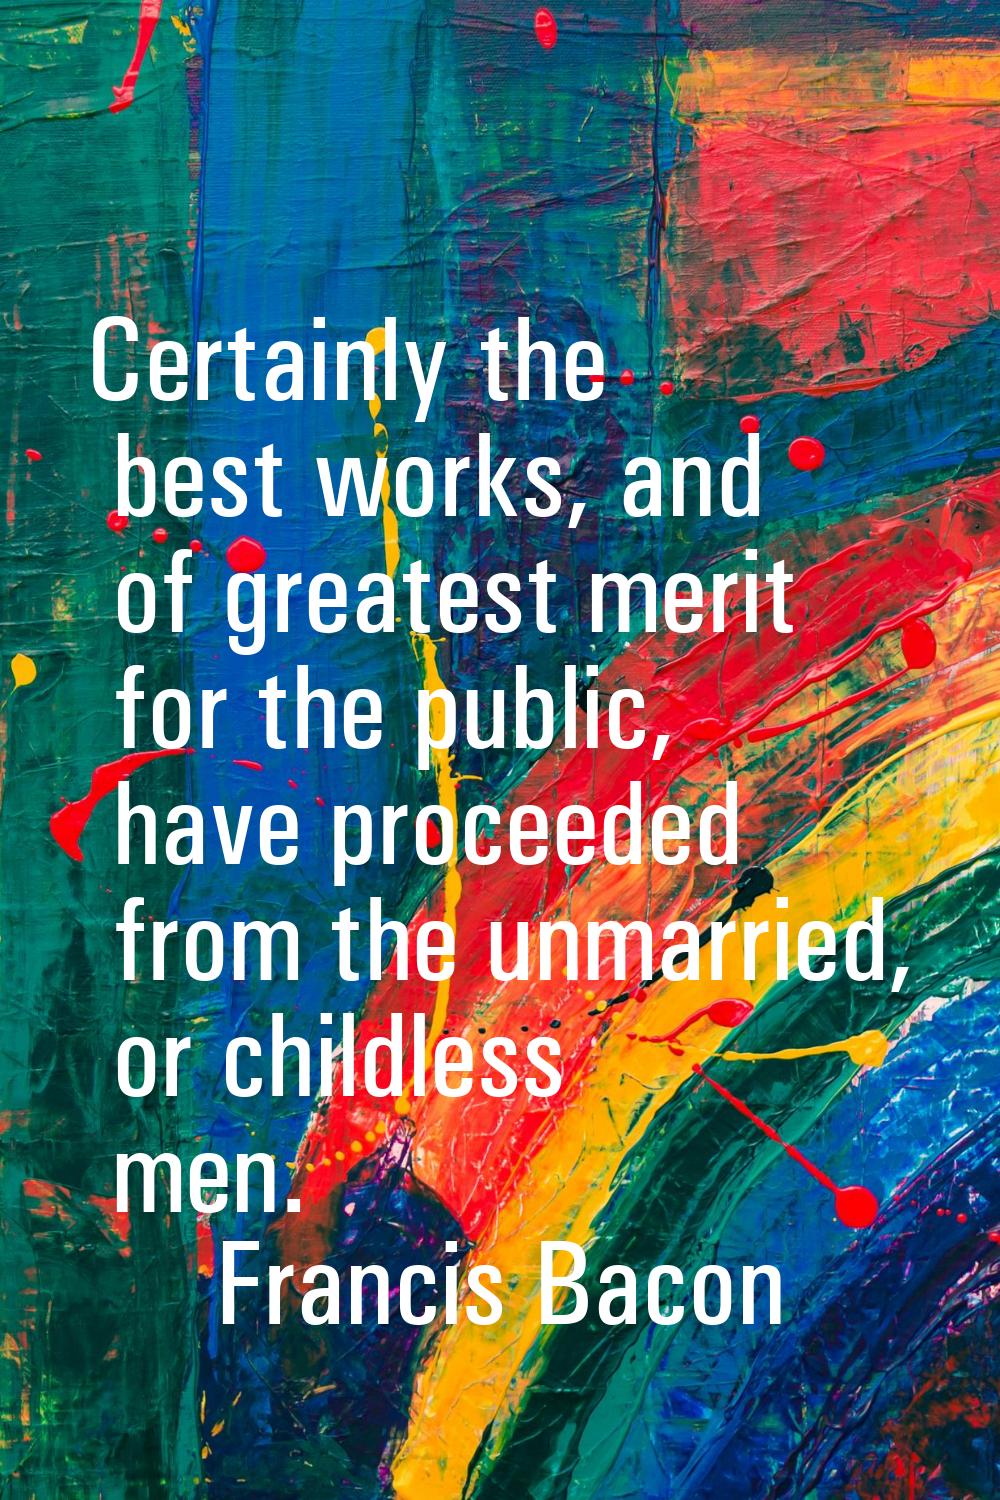 Certainly the best works, and of greatest merit for the public, have proceeded from the unmarried, 